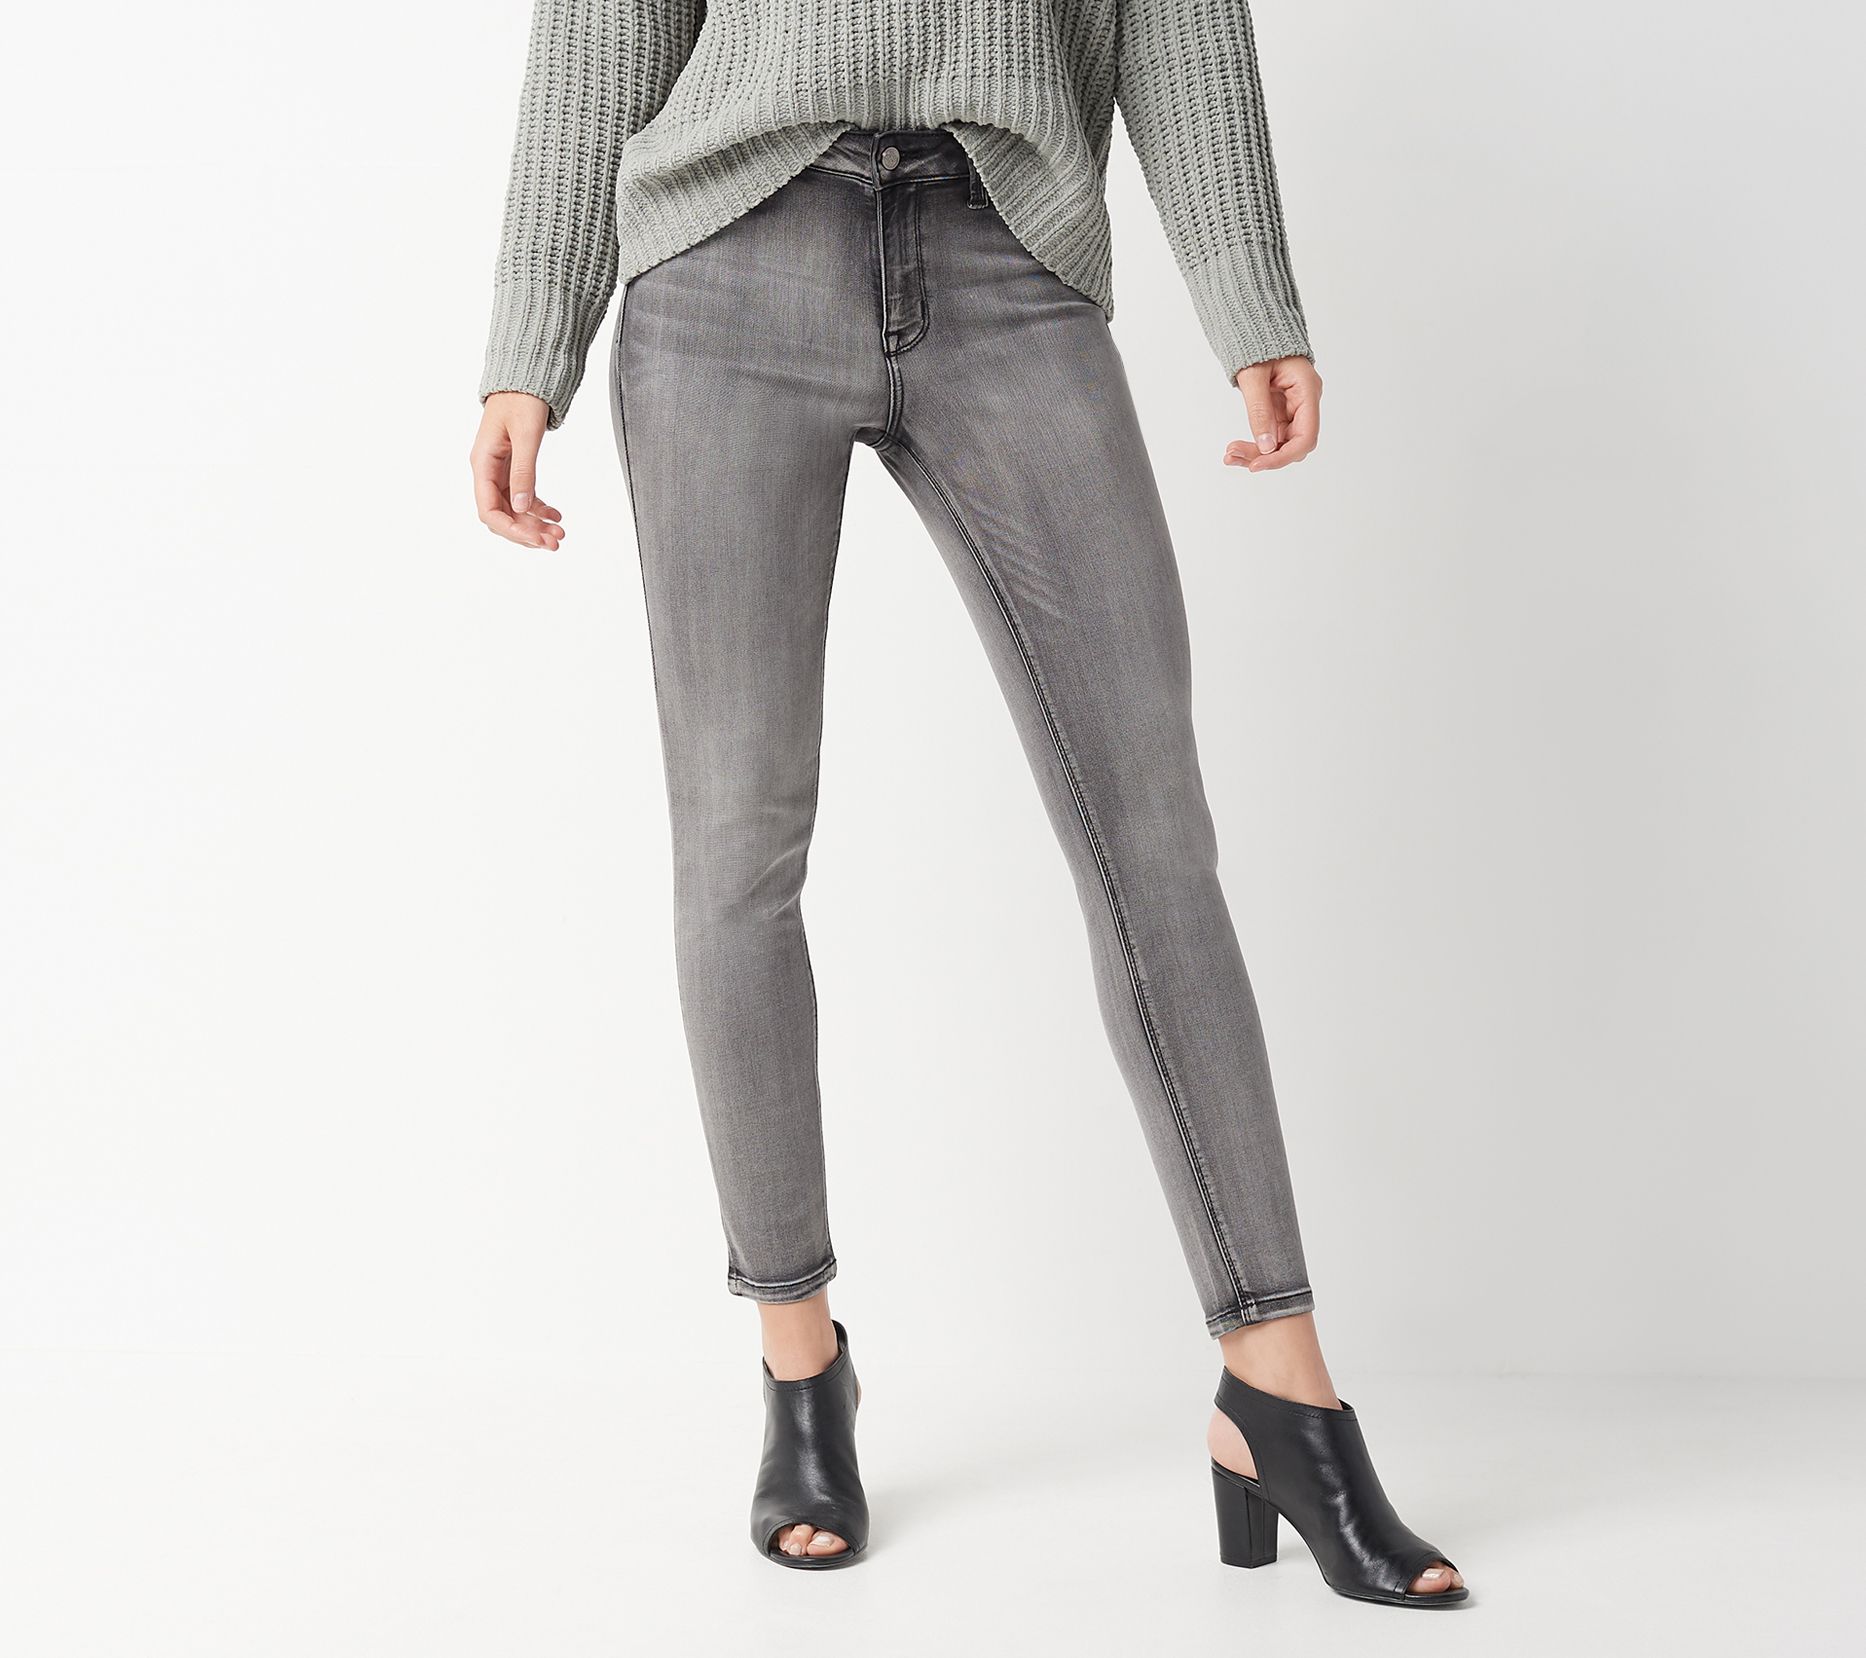 Laurie Felt Silky Denim Ankle Skinny Zip Fly Jeans - QVC.com